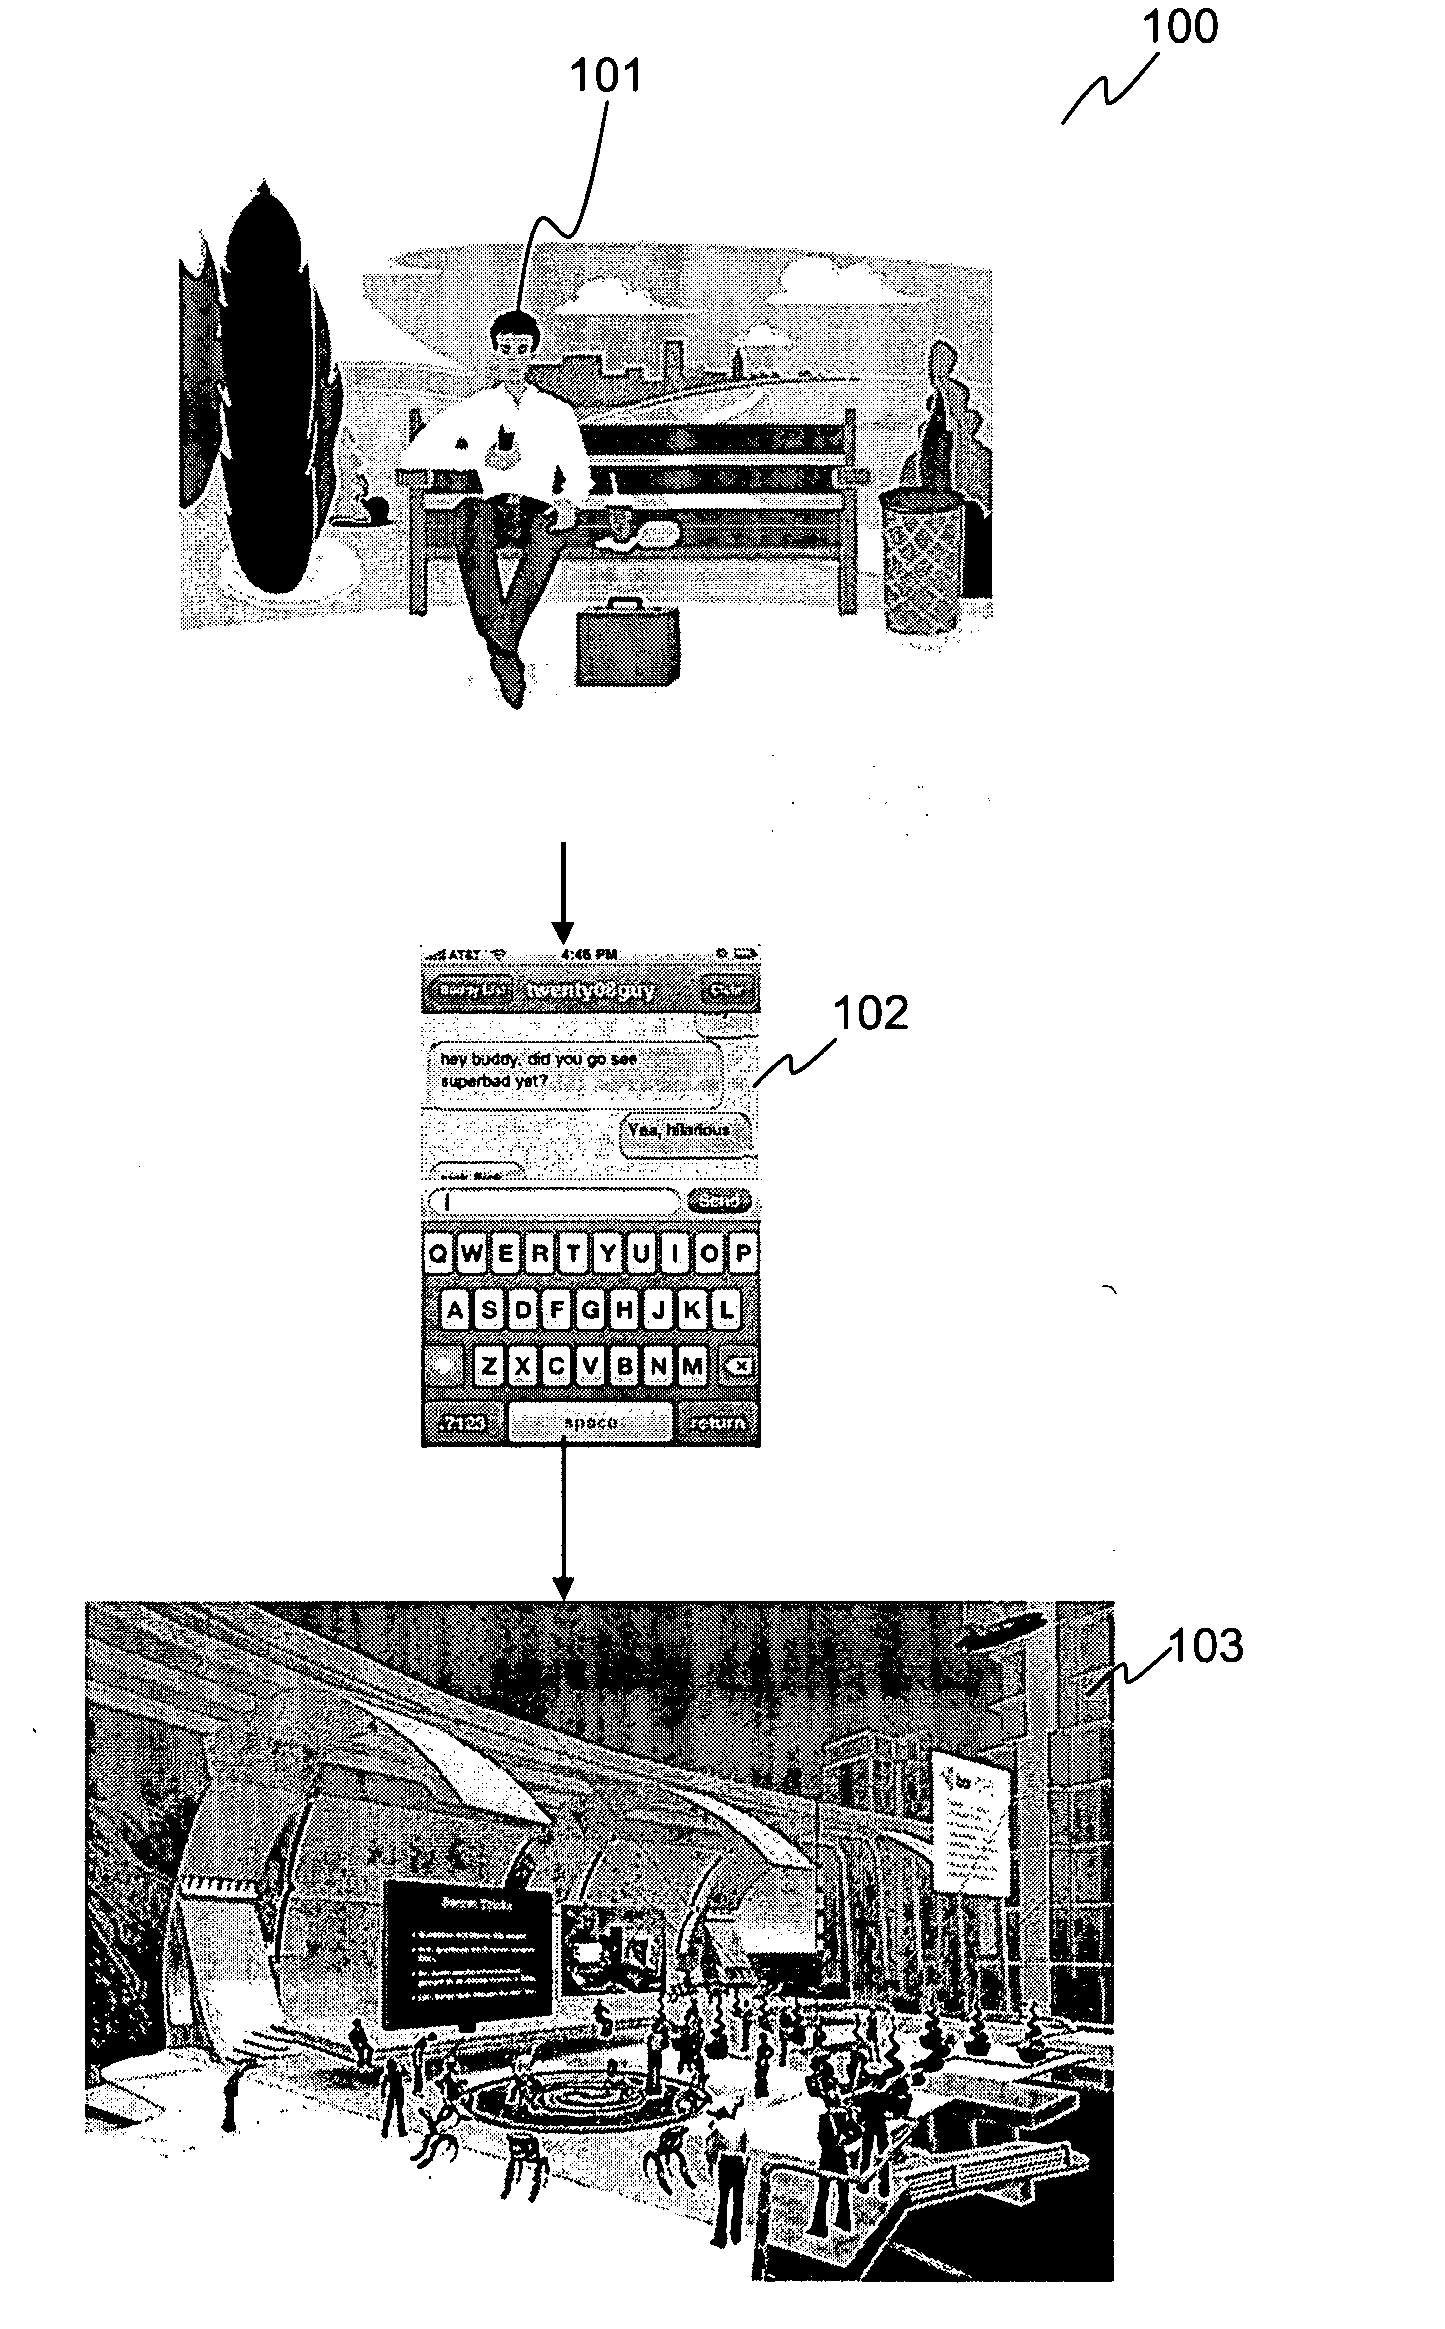 System and method for automatically controlling avatar actions using mobile sensors